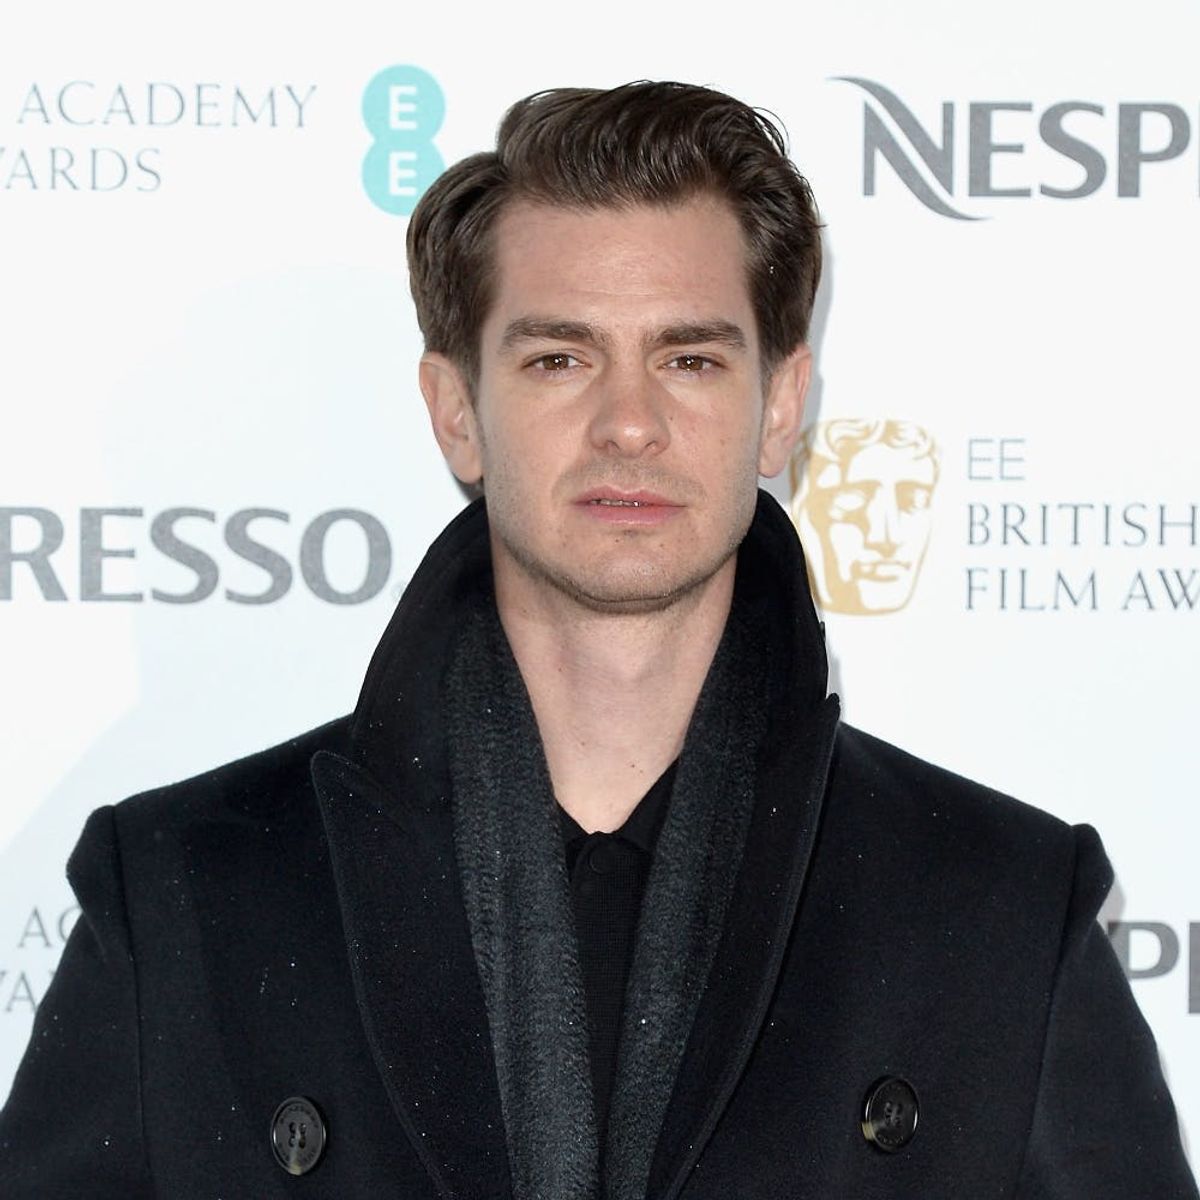 Andrew Garfield on Sexuality: “Maybe I’ll Have an Awakening Later in My Life”